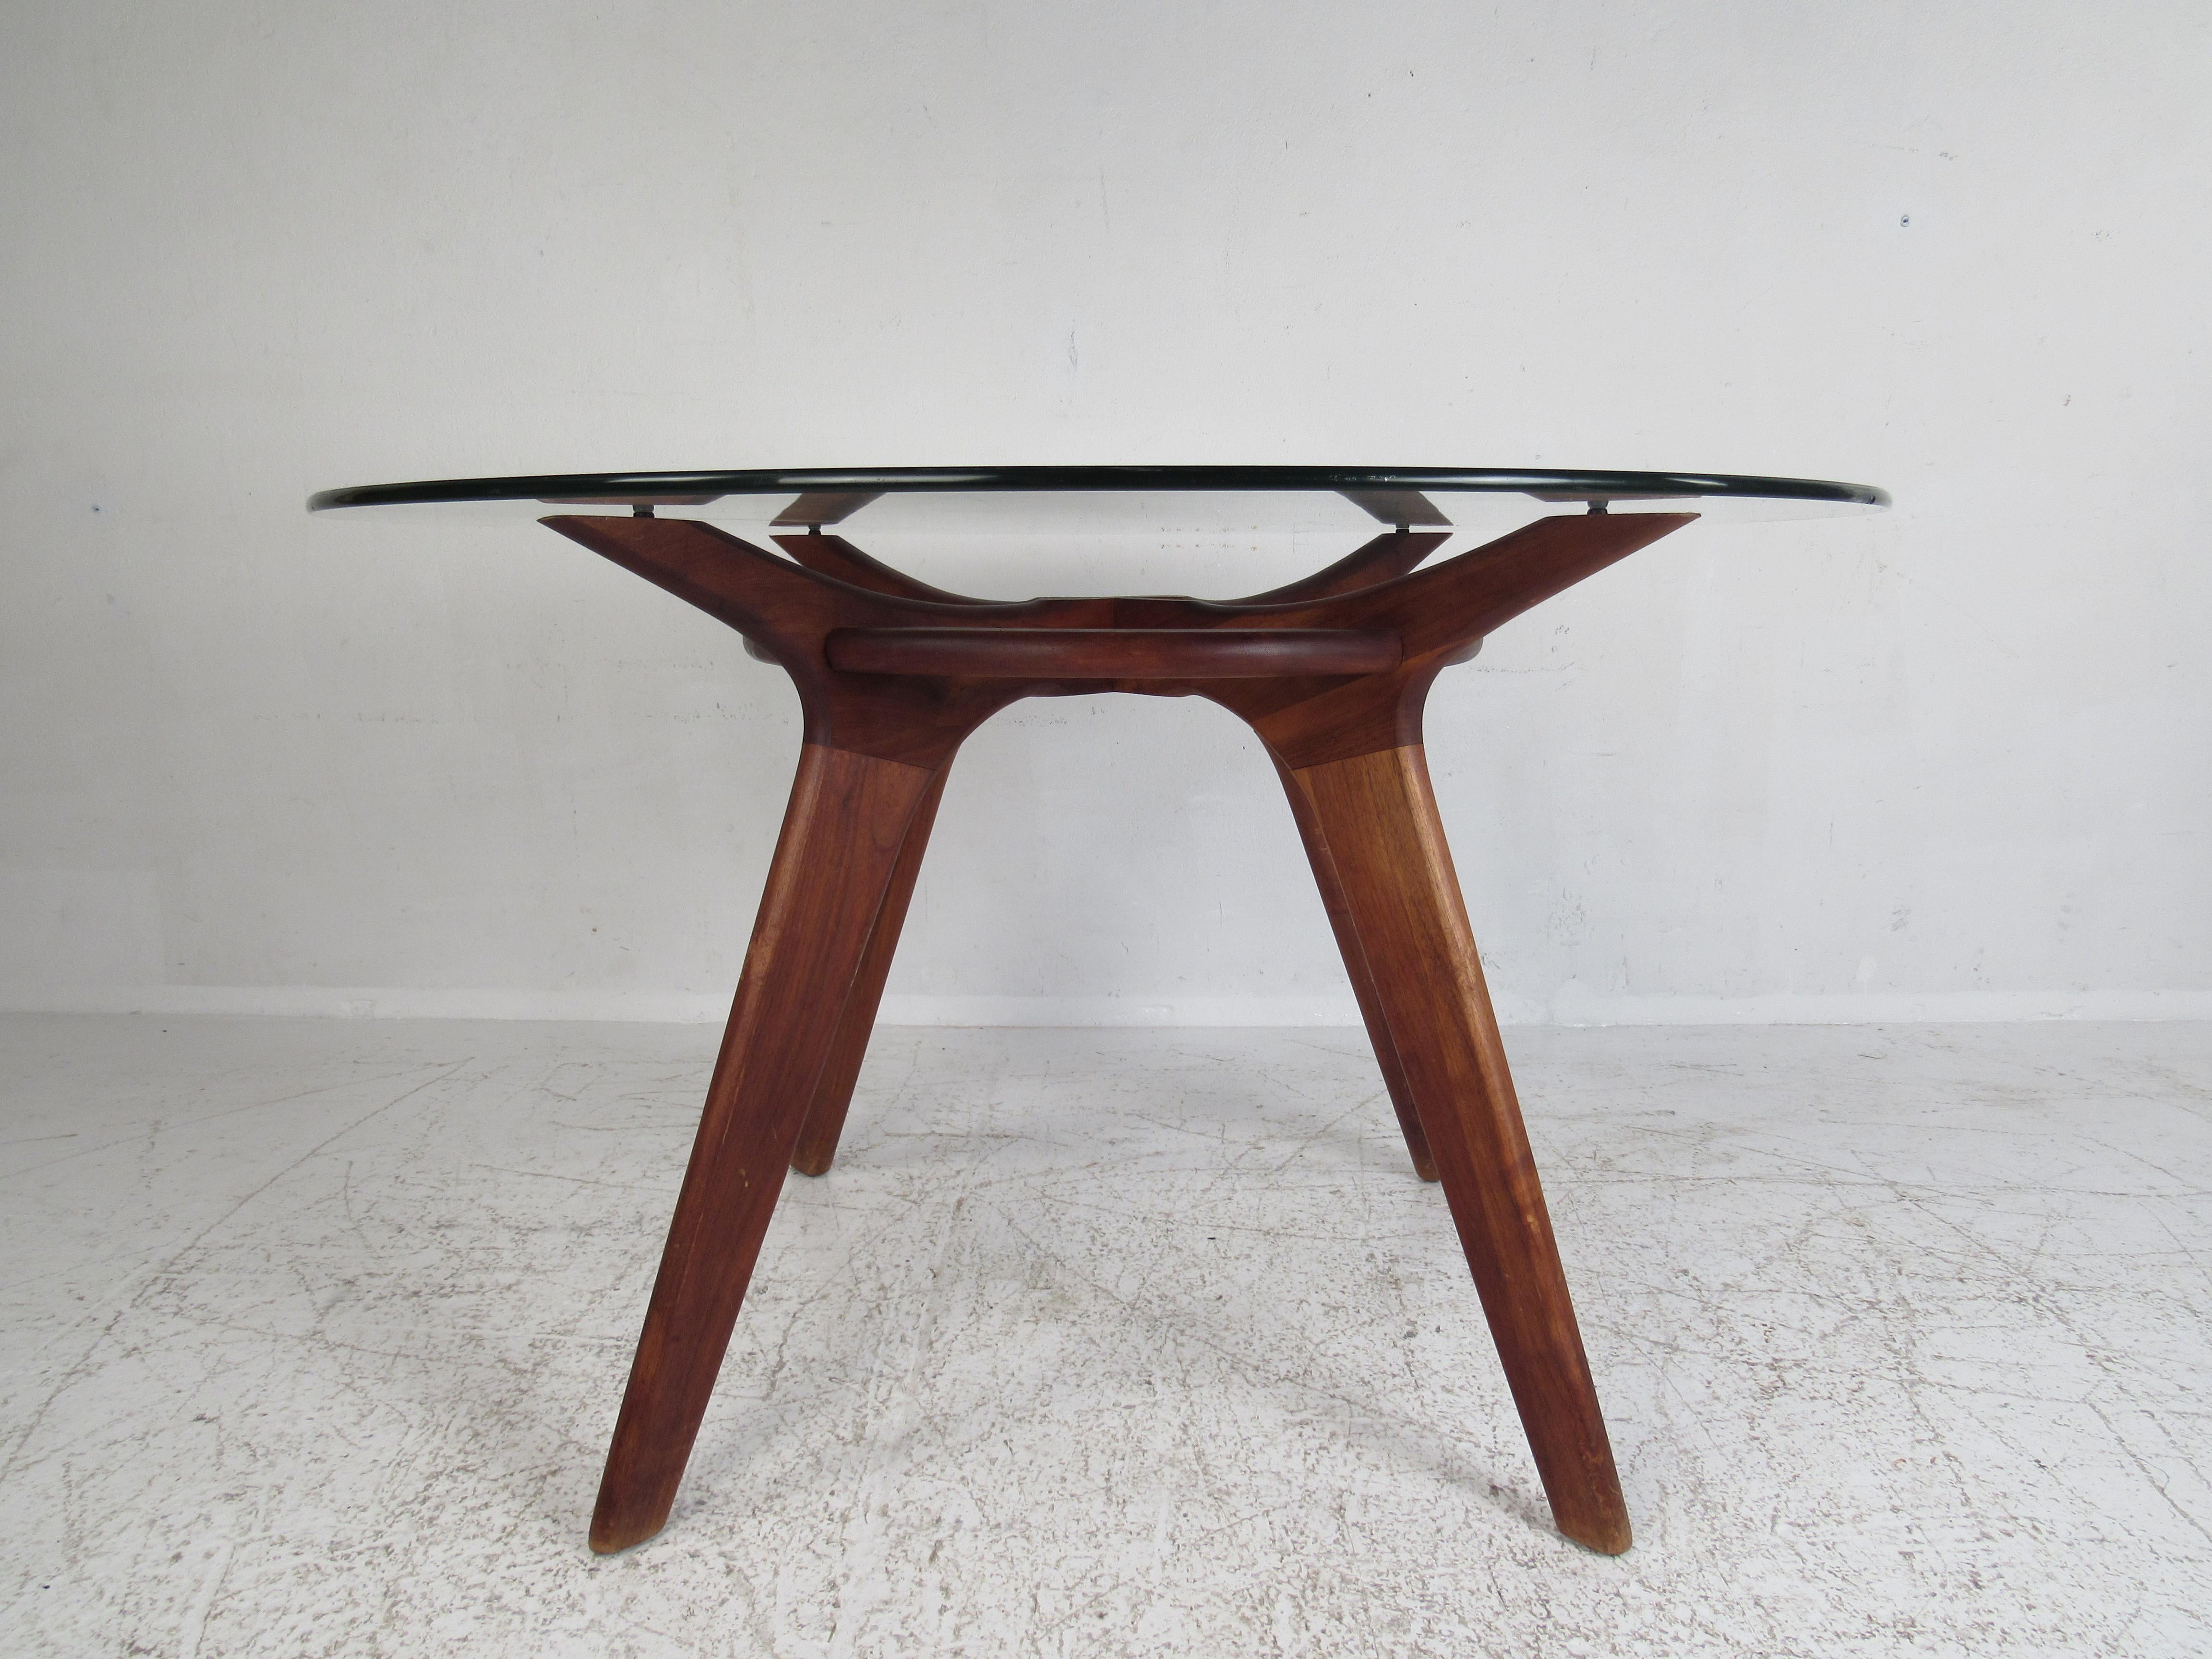 A spectacular vintage design by Adrian Pearsall with a large round glass top and a sculpted walnut base. This stunning mid-century table resembles a compass, hence the name. The elegant walnut wood grain, angled legs, and sculpted top supports add